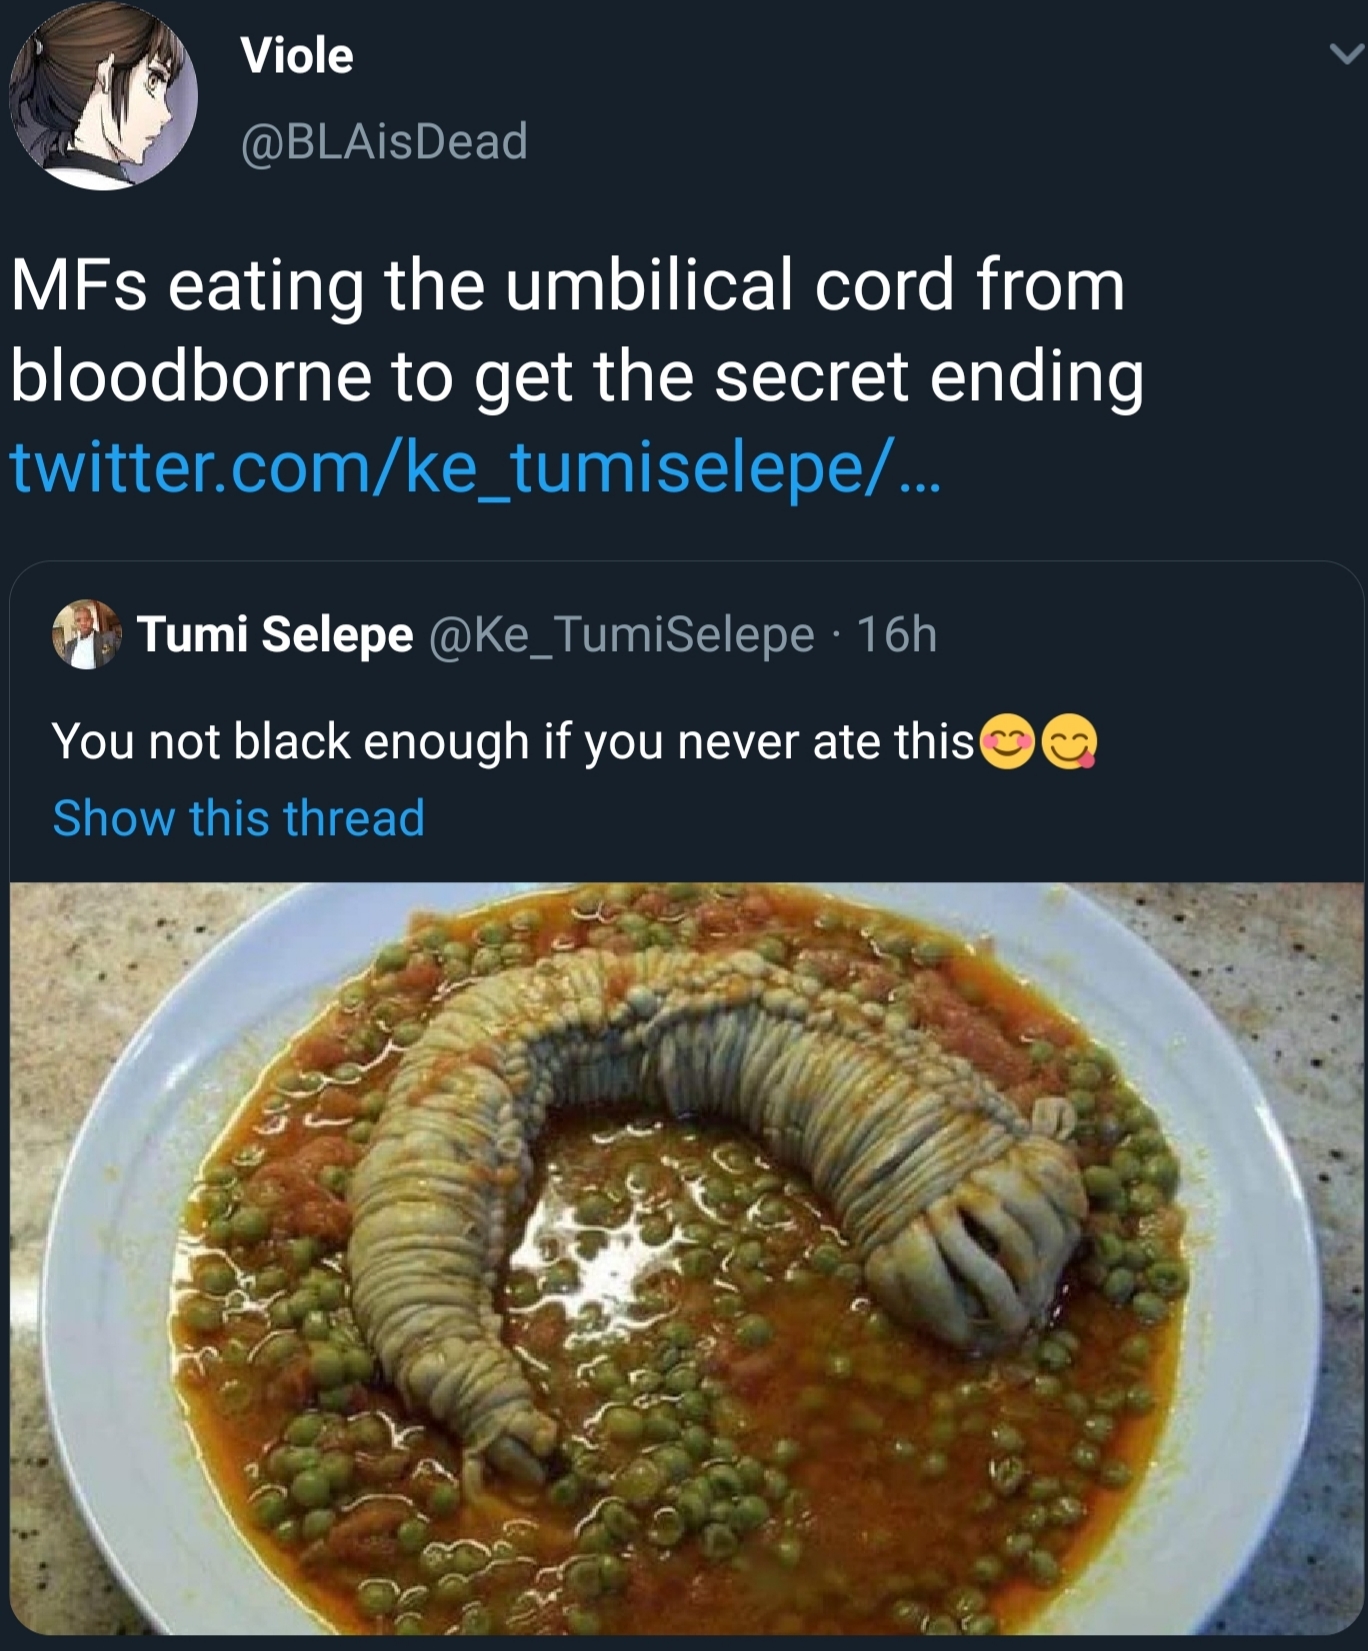 dish - Viole MFs eating the umbilical cord from 'bloodborne to get the secret ending, twitter.comke_tumiselepe... Tumi Selepe 16h You not black enough if you never ate this Show this thread